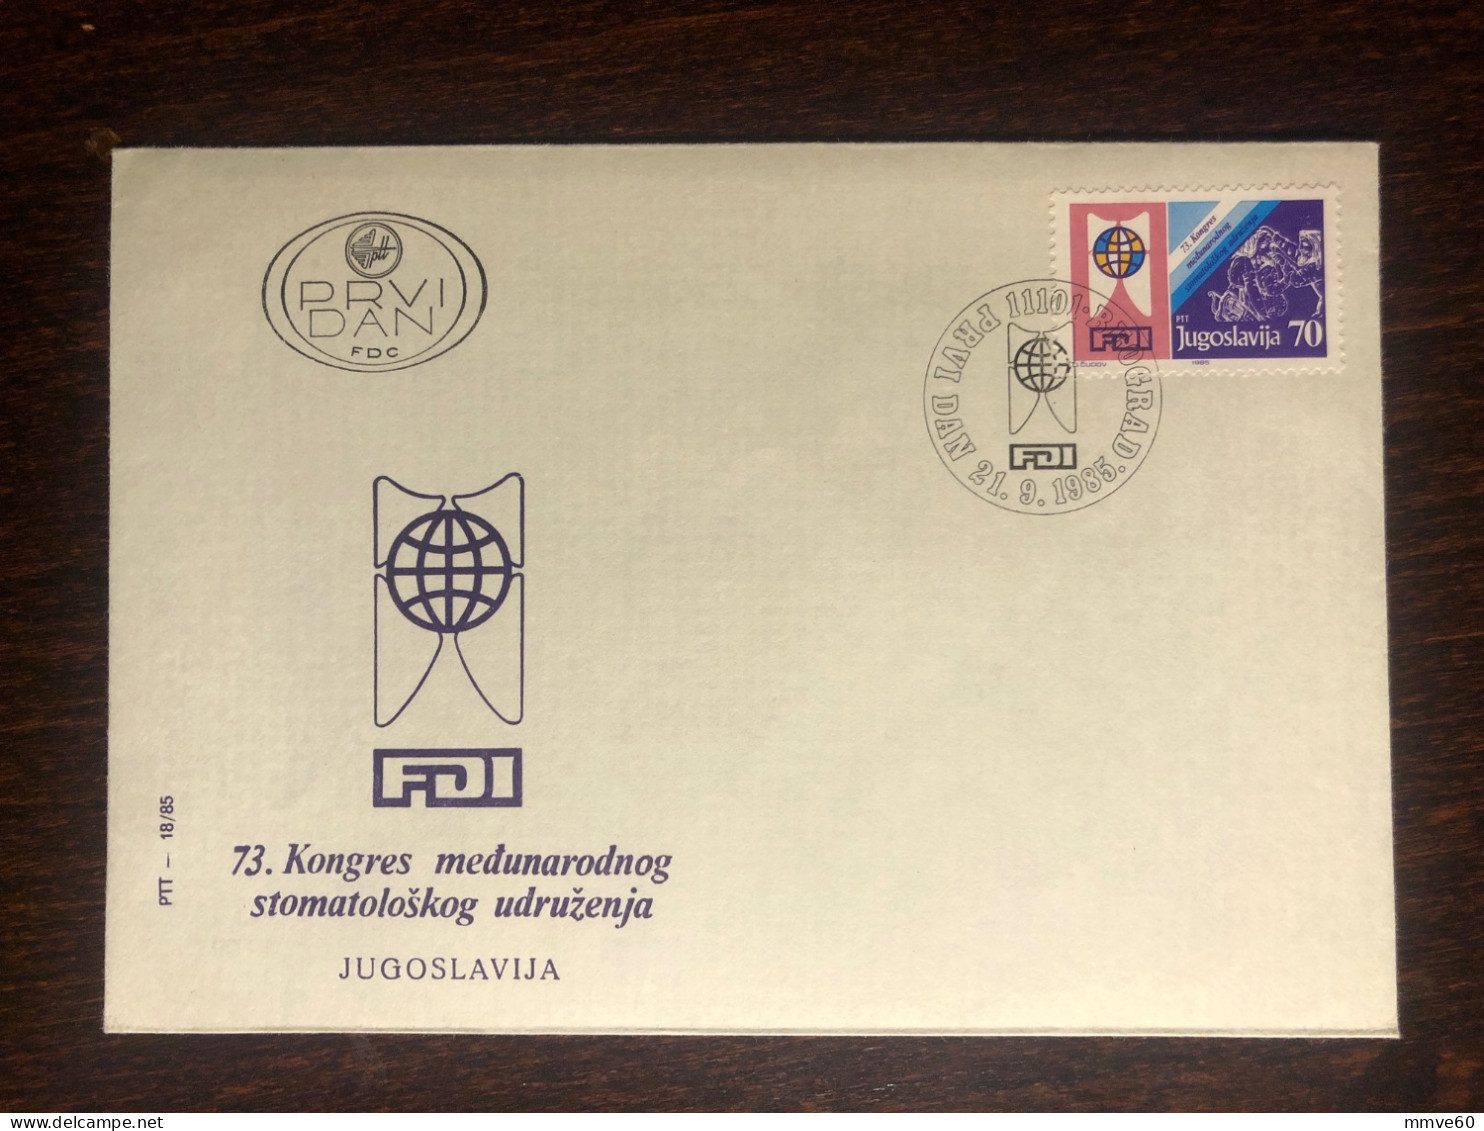 YUGOSLAVIA FDC COVER 1985 YEAR DENTISTRY DENTAL HEALTH MEDICINE STAMPS - FDC